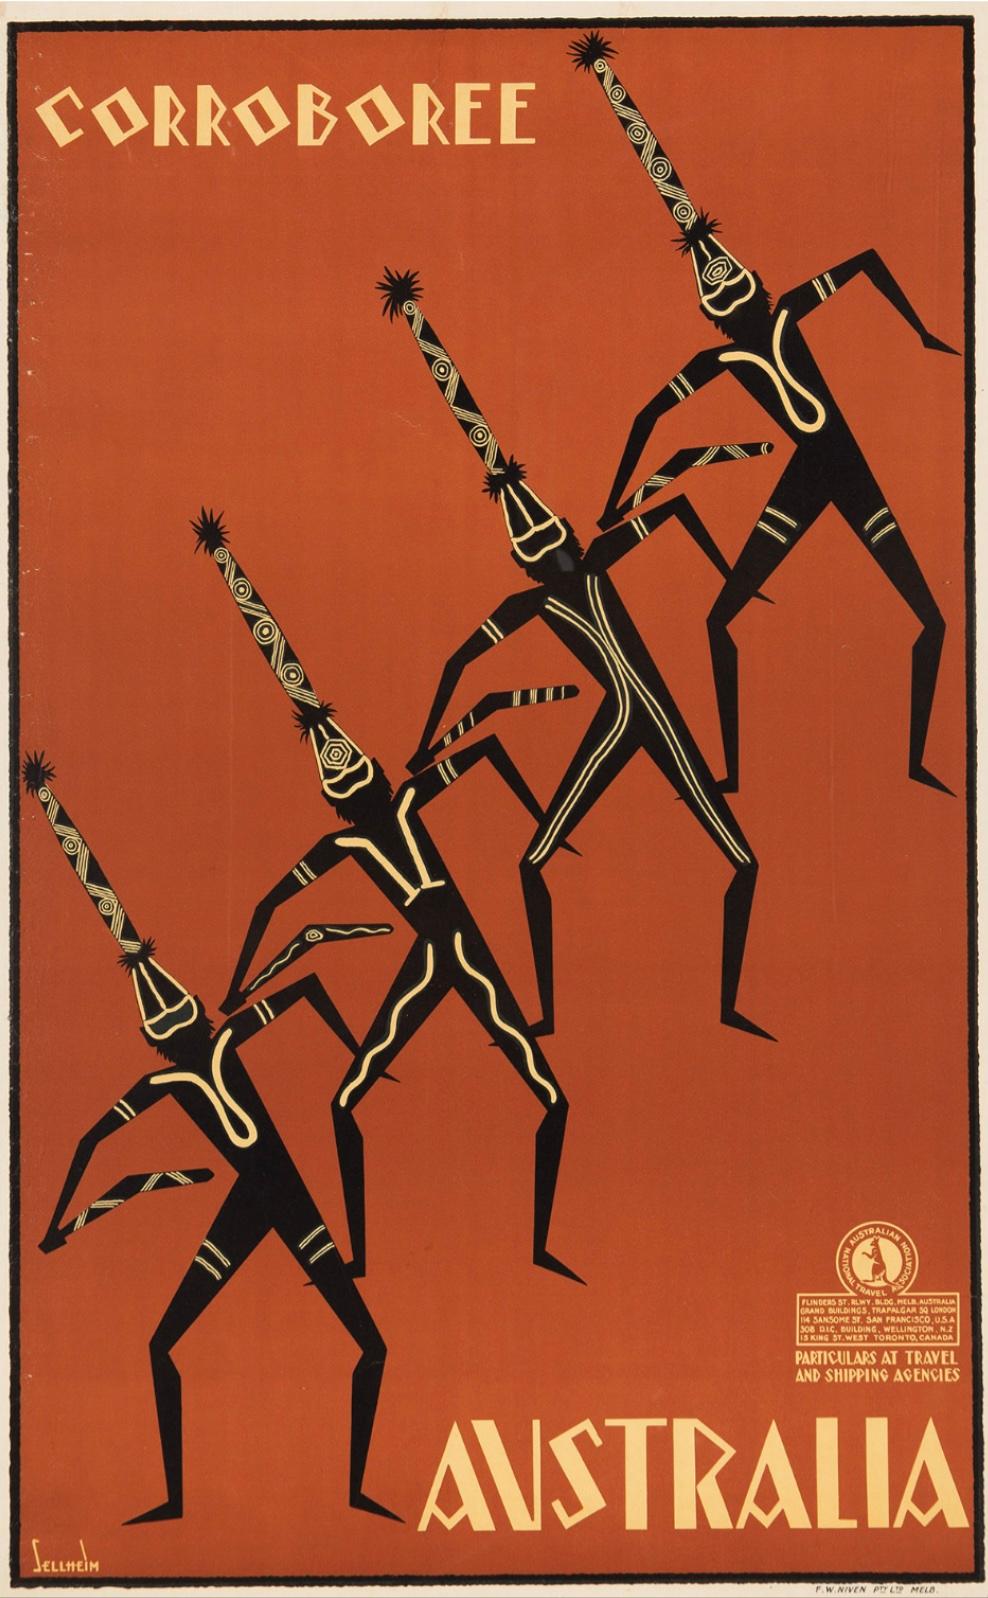 'Corroboree' Australia Original Vintage Poster by Sellheim, 1934

Gert Sellheim, a German-Australian artist, was one of the earliest designers commissioned by the Australian National Travel Association (ANTA) to produce designs for Australian travel